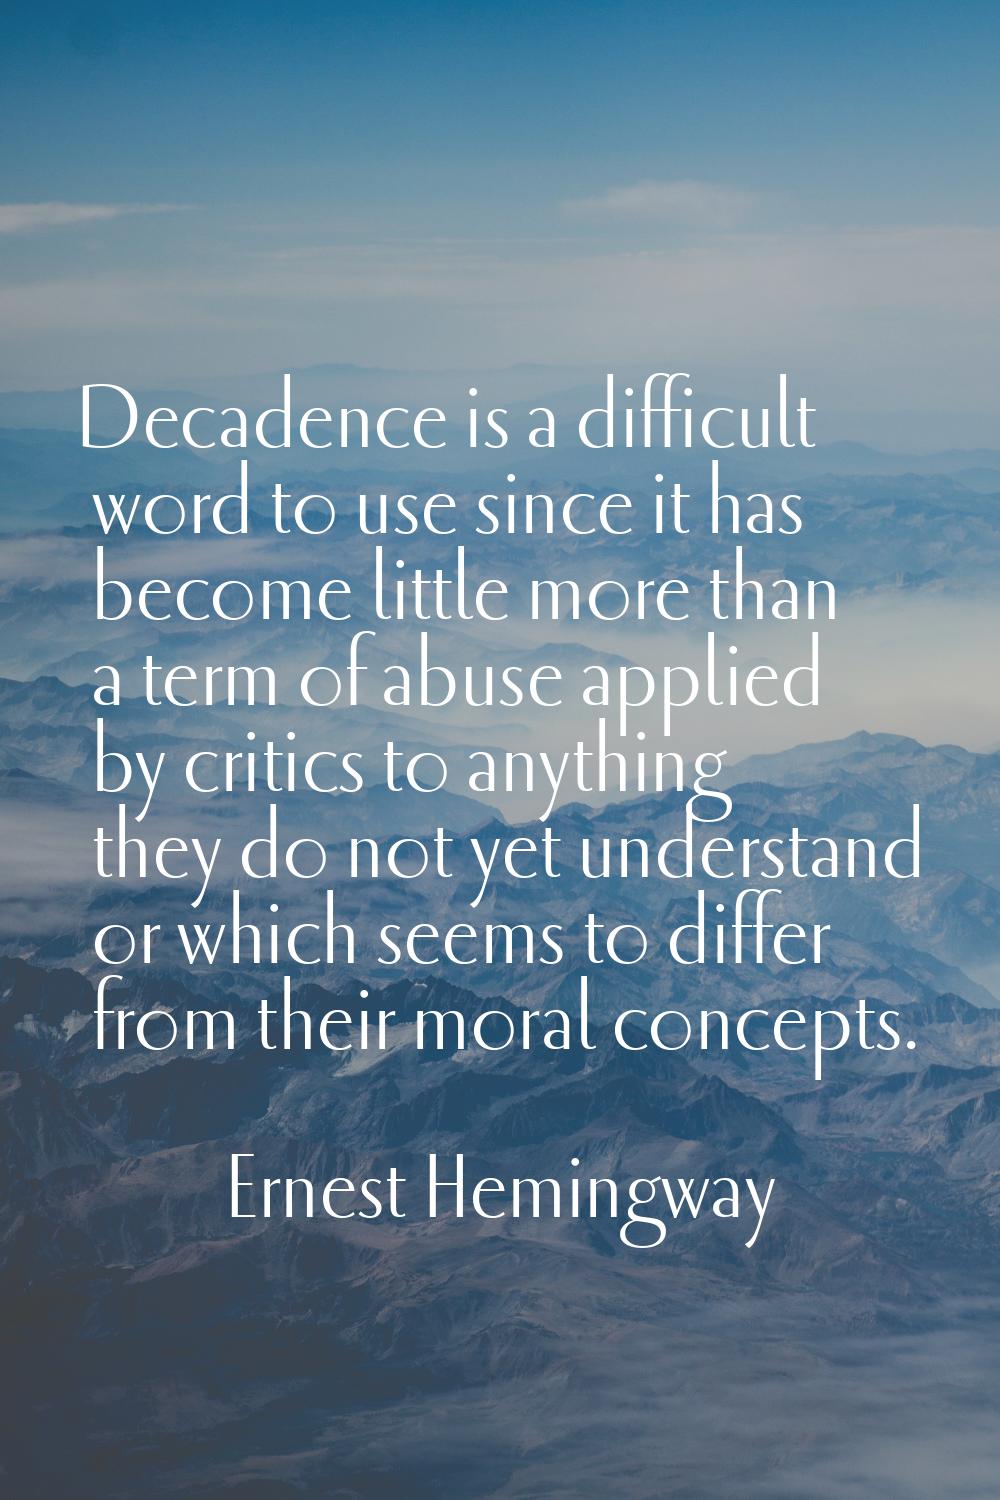 Decadence is a difficult word to use since it has become little more than a term of abuse applied b